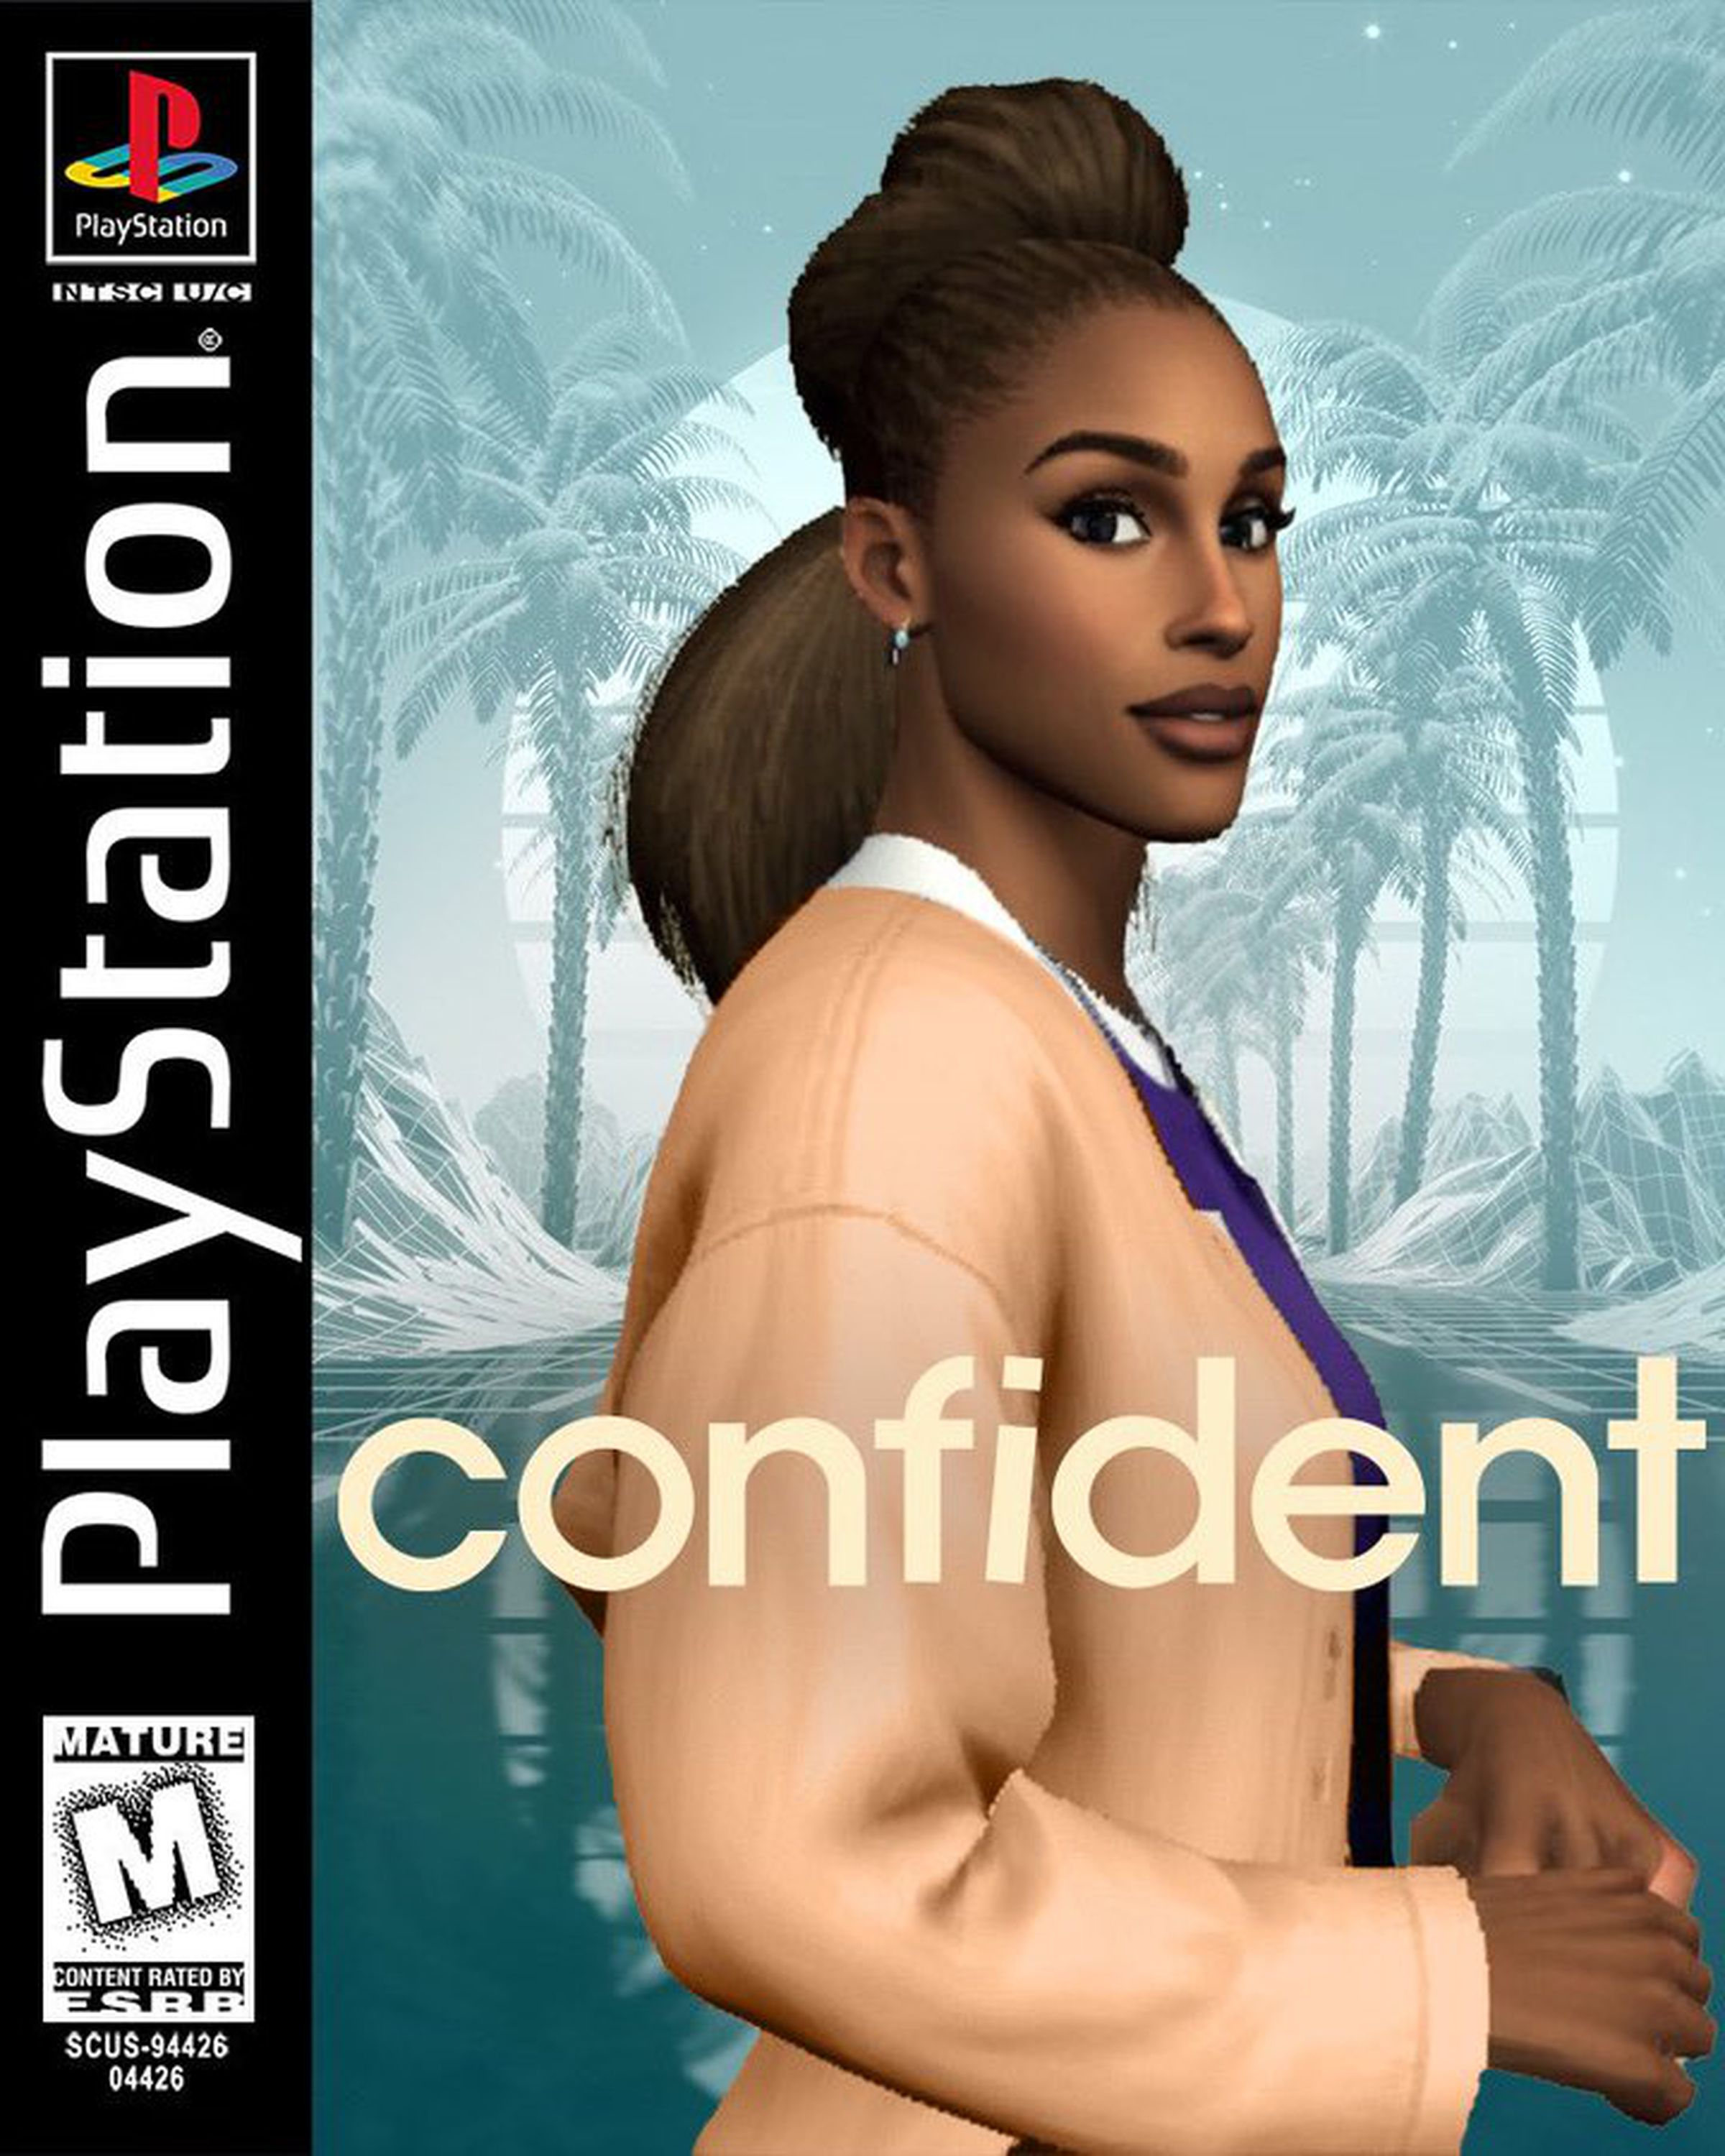 April Fool’s Day spoof of Insecure, imagined a PlayStation 1 game called “Confident.”